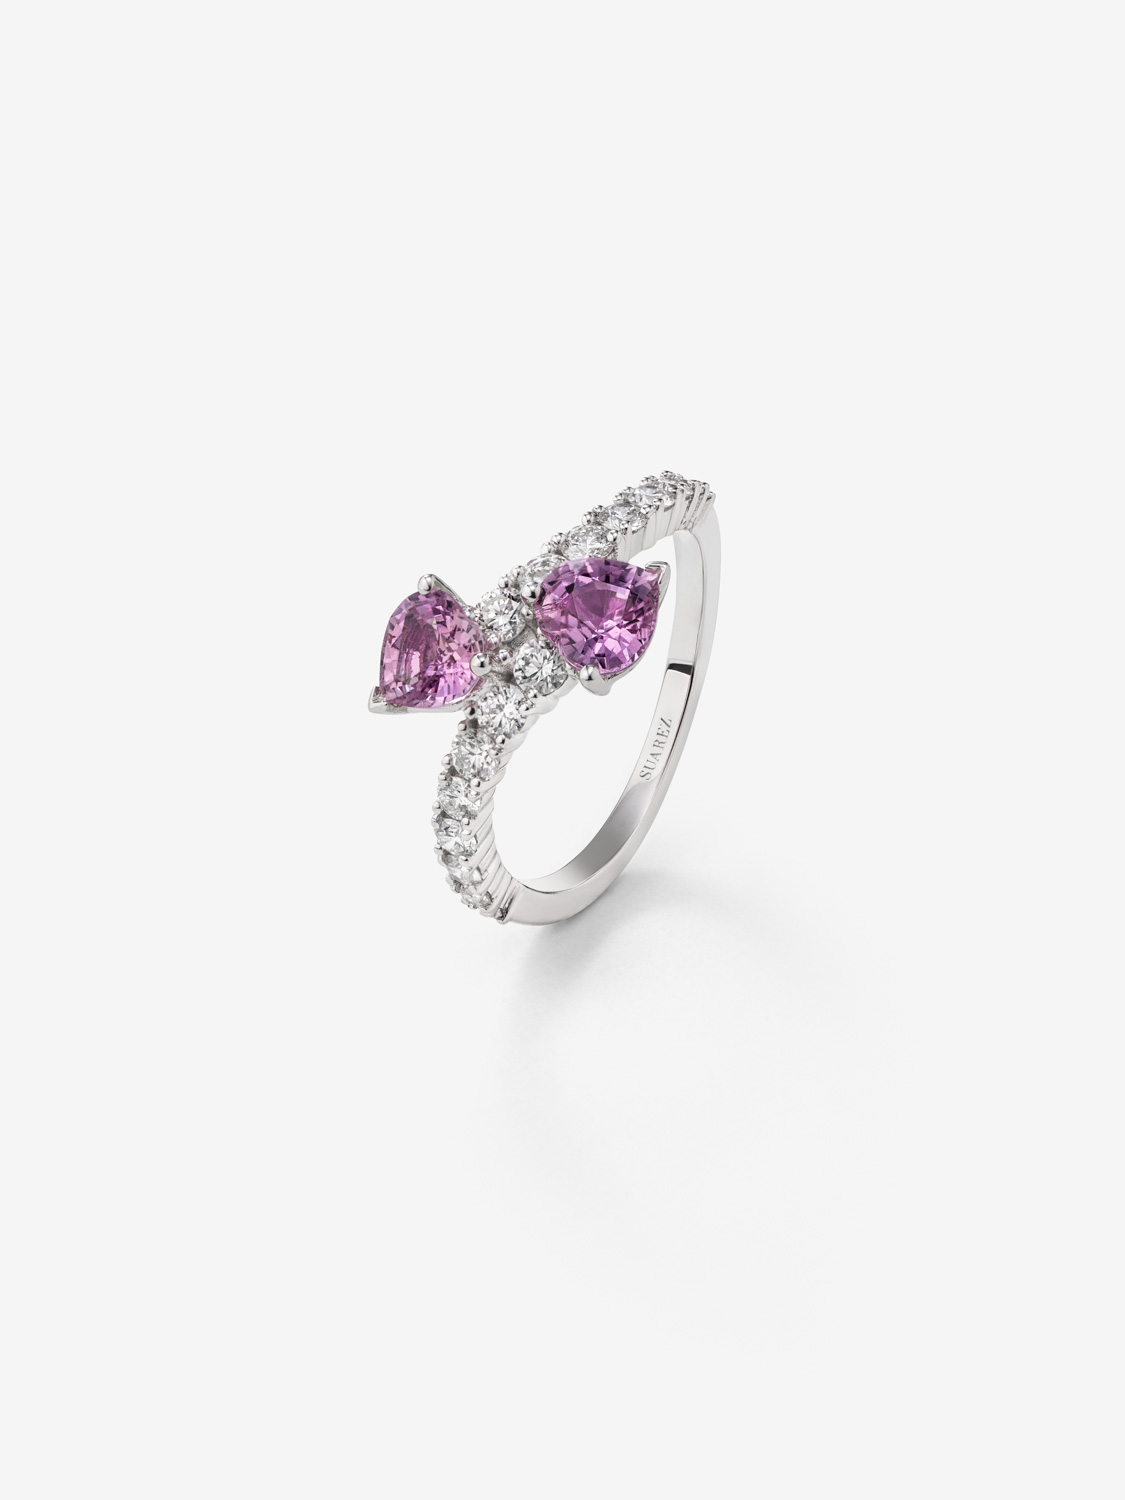 You and I 18k White Gold Ring with pink sapphires in 1.53 cts and white diamonds in a brilliant 0.6 CTS diamonds